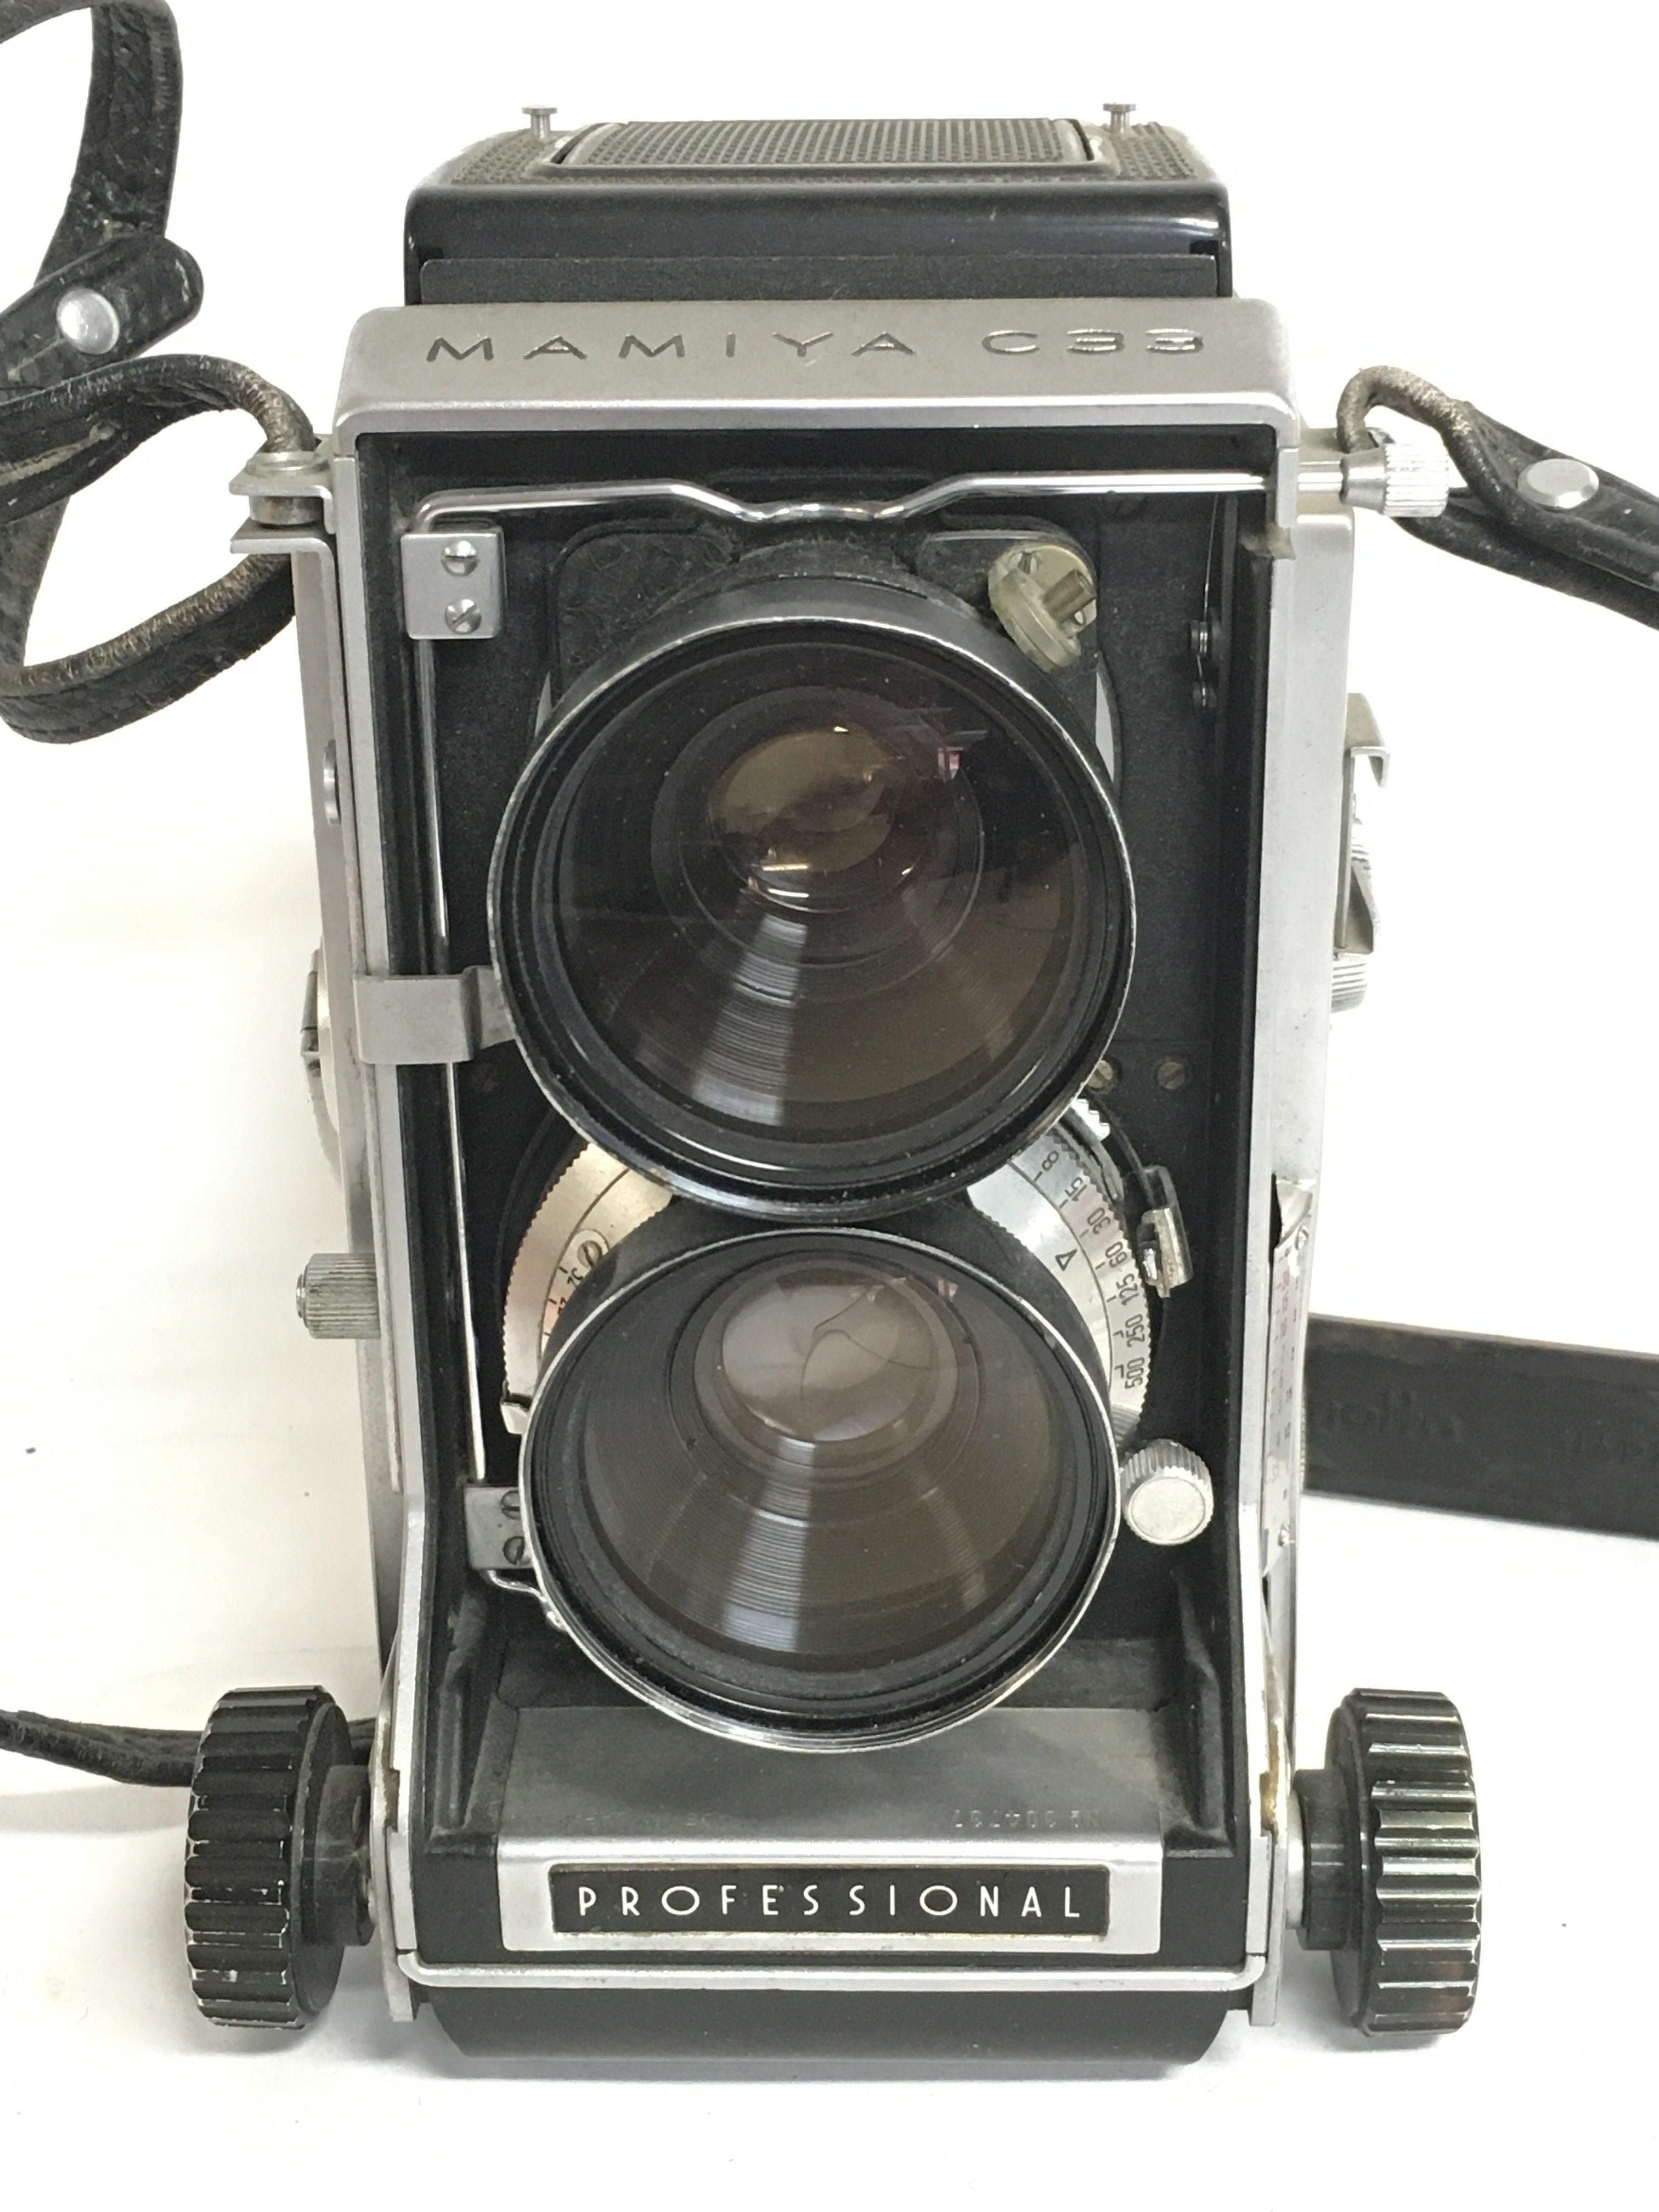 A vintage Mamiya C33 professional camera fitted wi